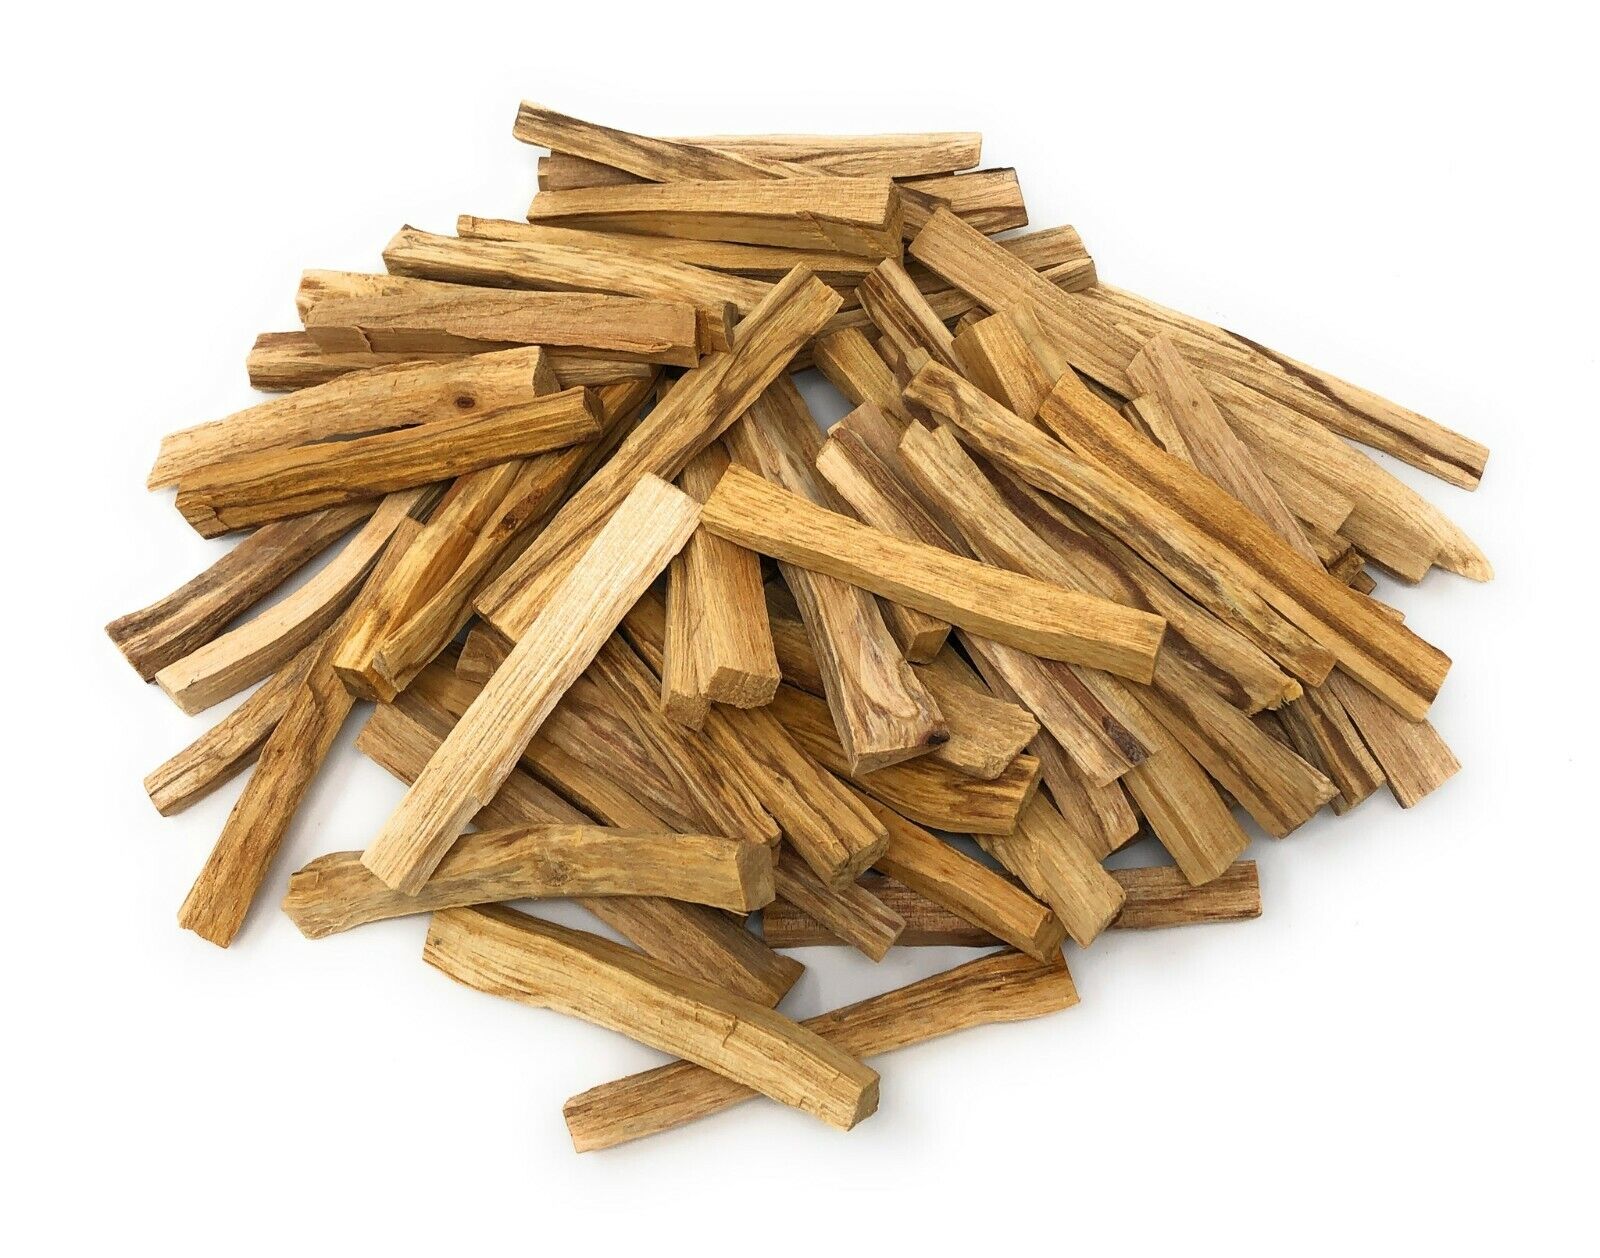 1 pound of PALO SANTO Holly wood sticks 4-5 inches 